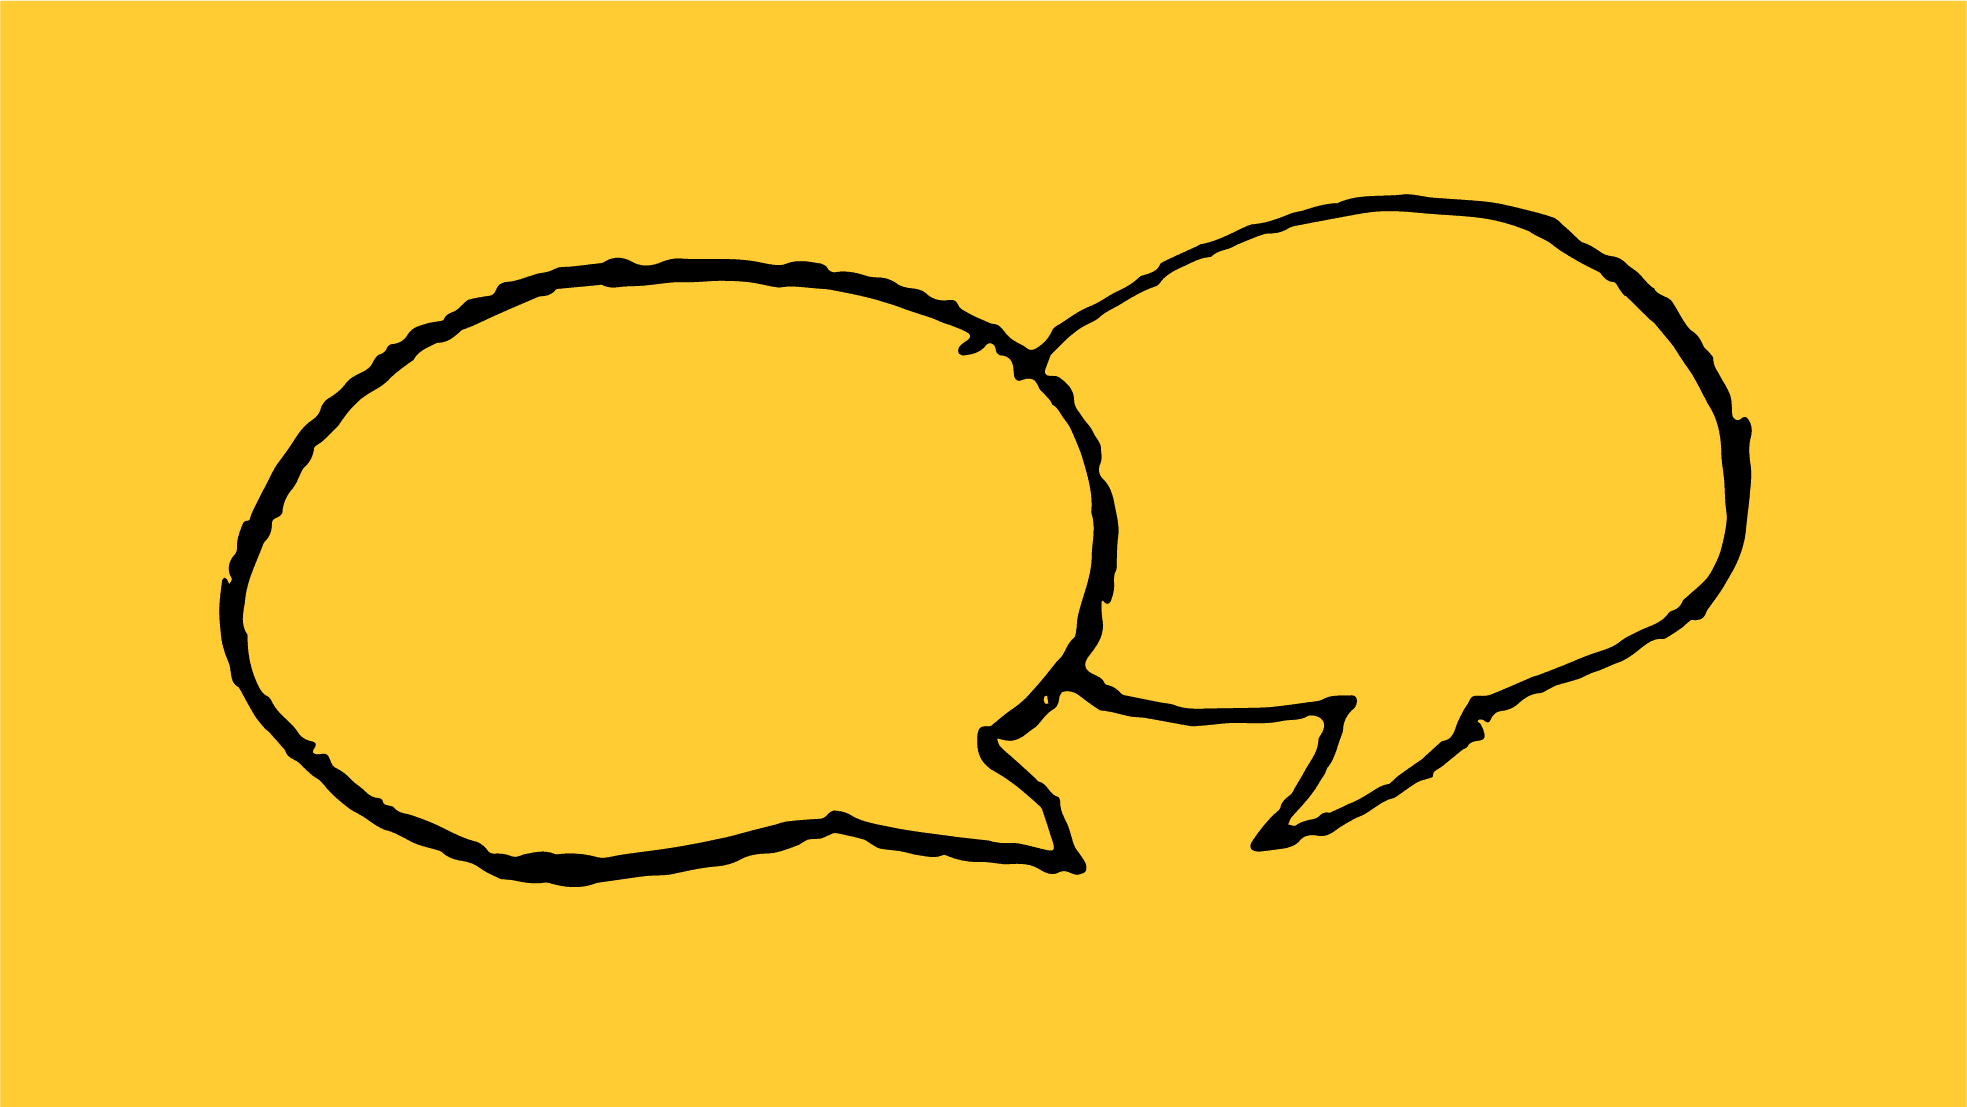 illustration of speech bubbles on a yellow background